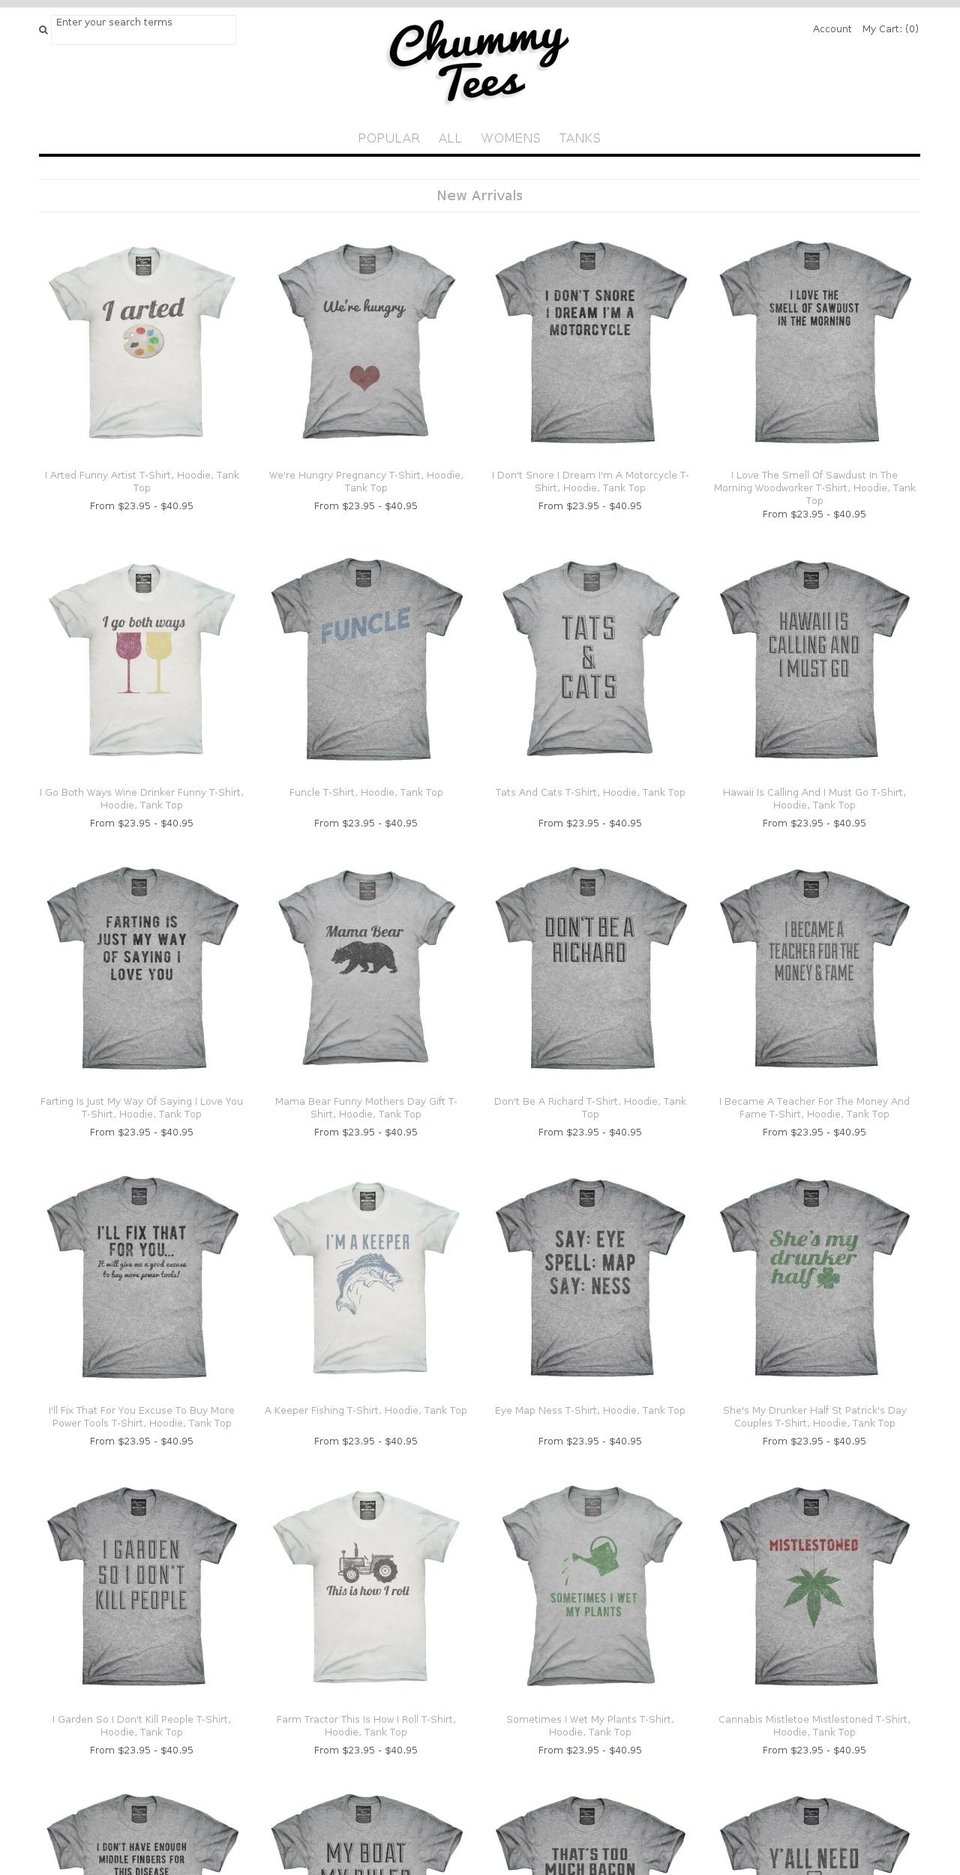 Colors Shopify theme site example chummytees.com